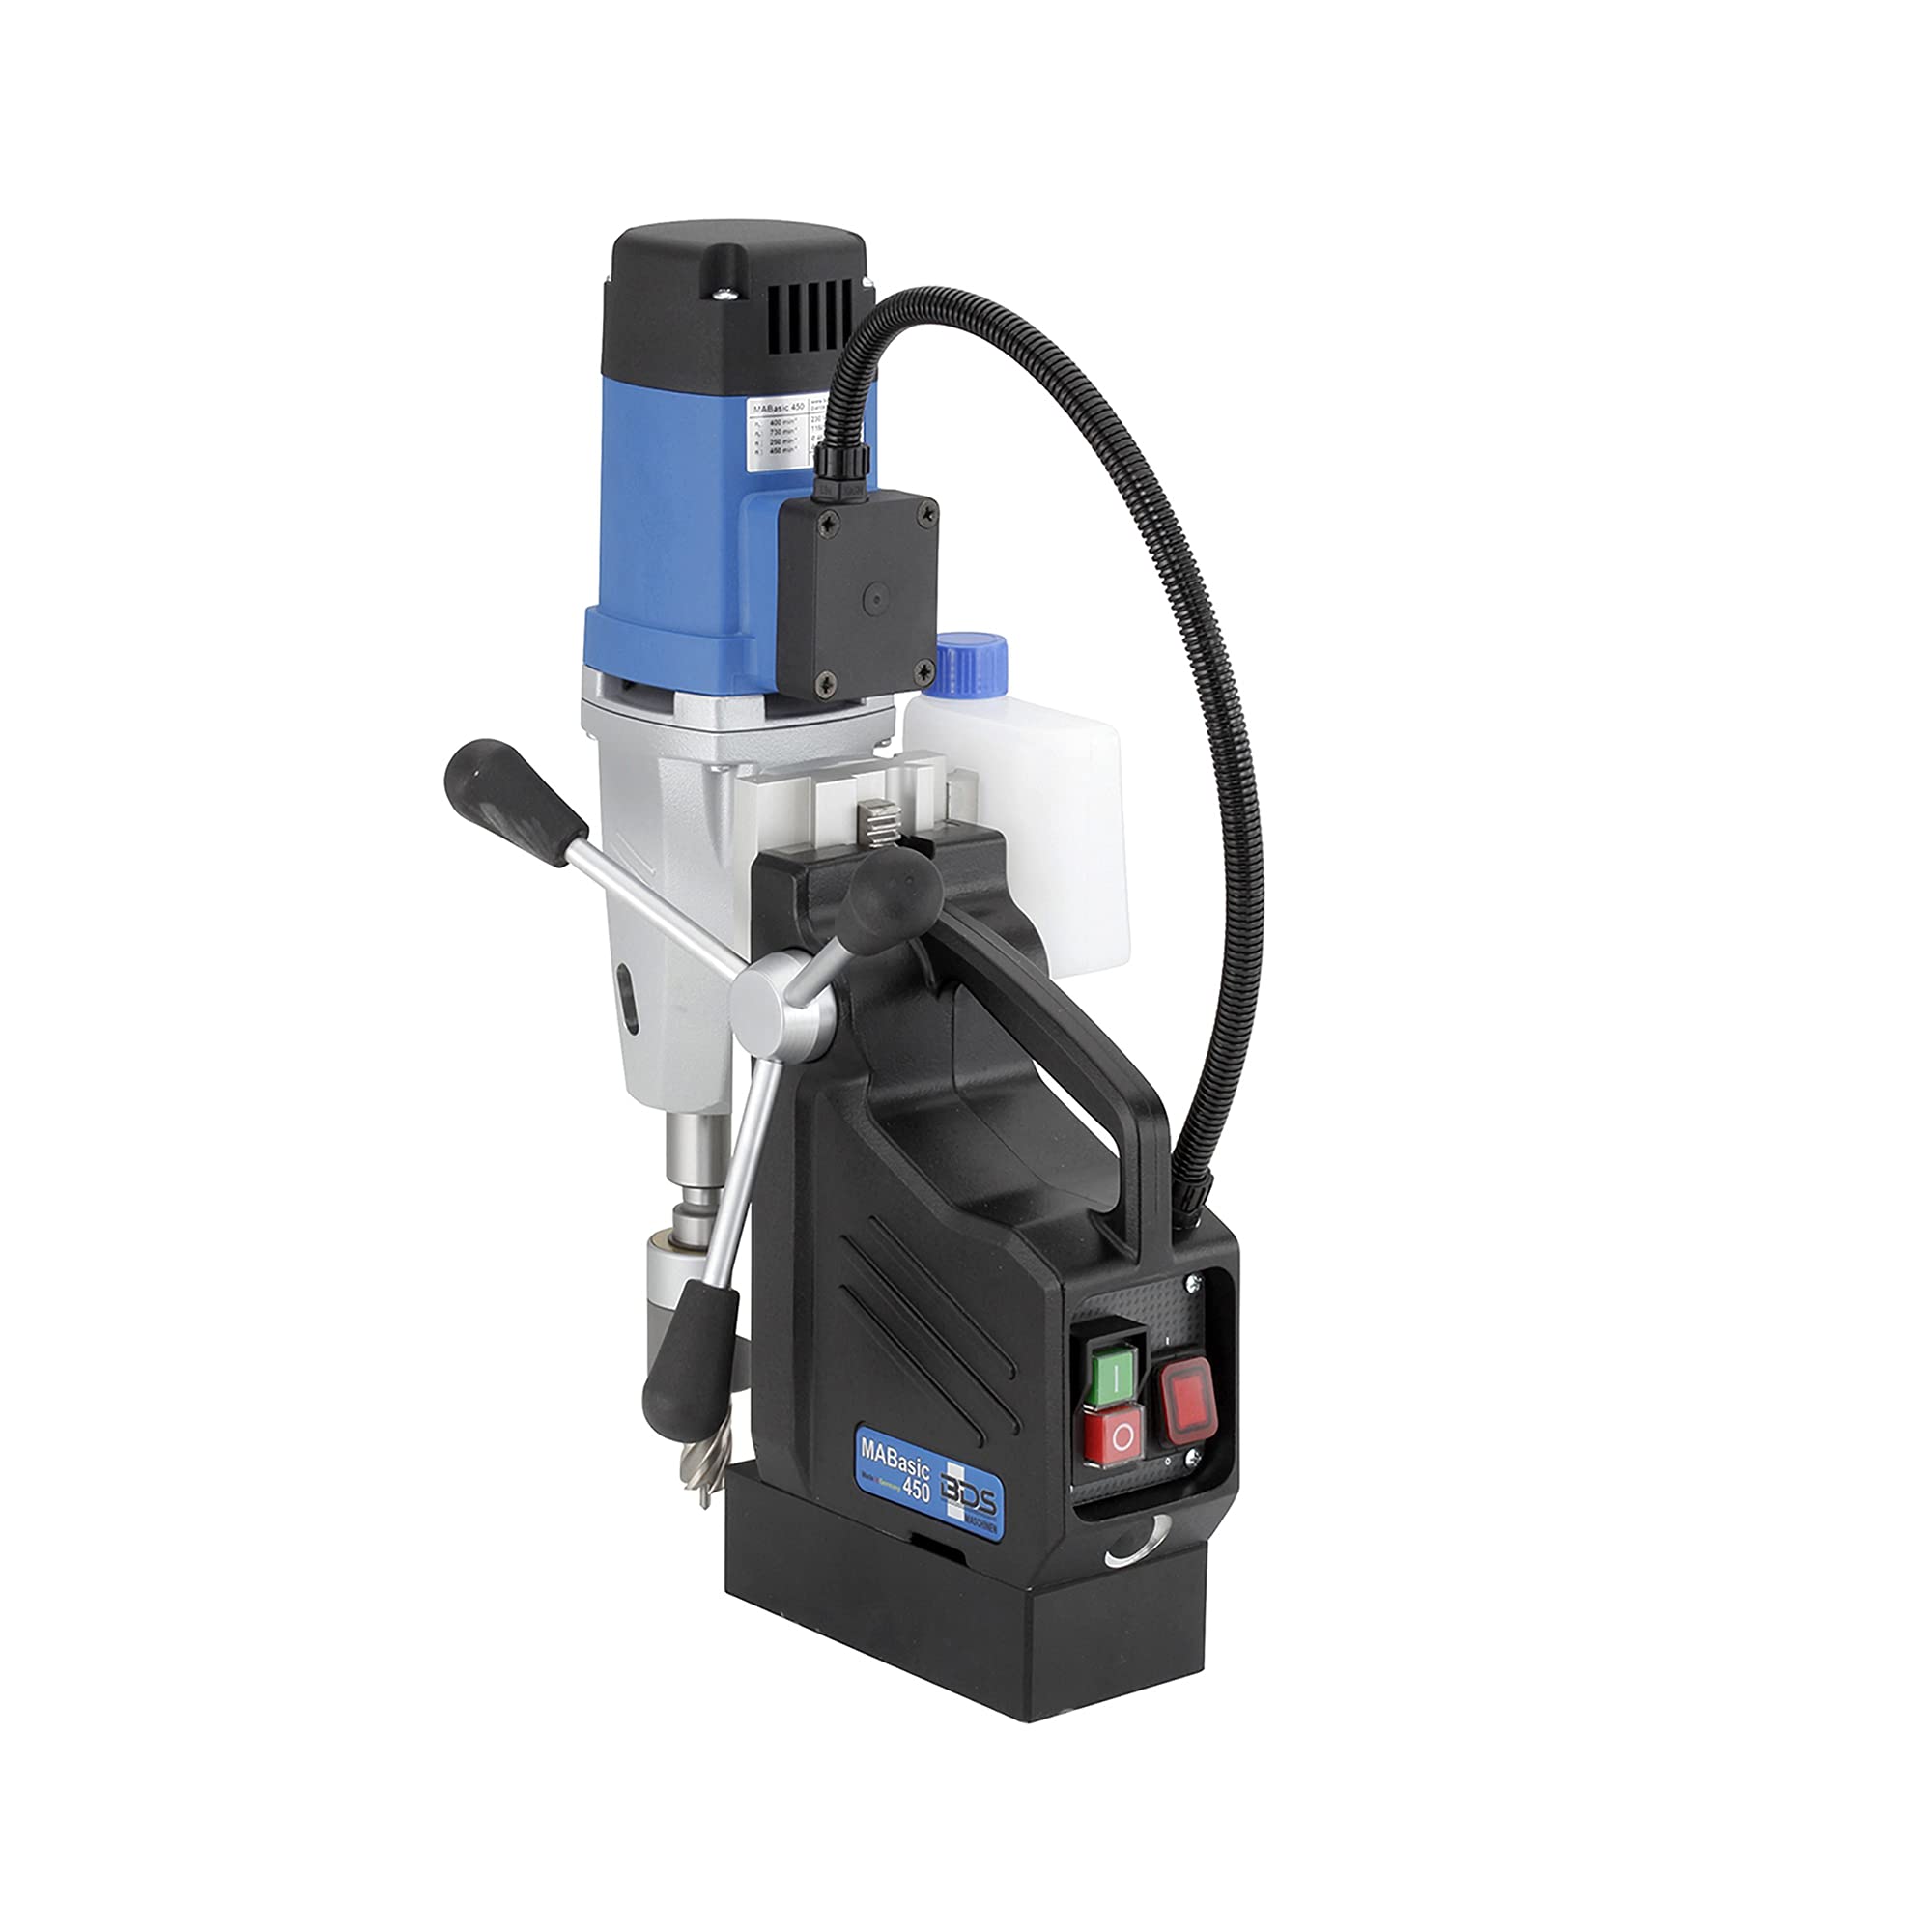 C.S. Unitec MABasic 450 Portable Magnetic Drill Press | 1150W 2-Speed Benchtop Power Drill Machine w/up to 1-3/4